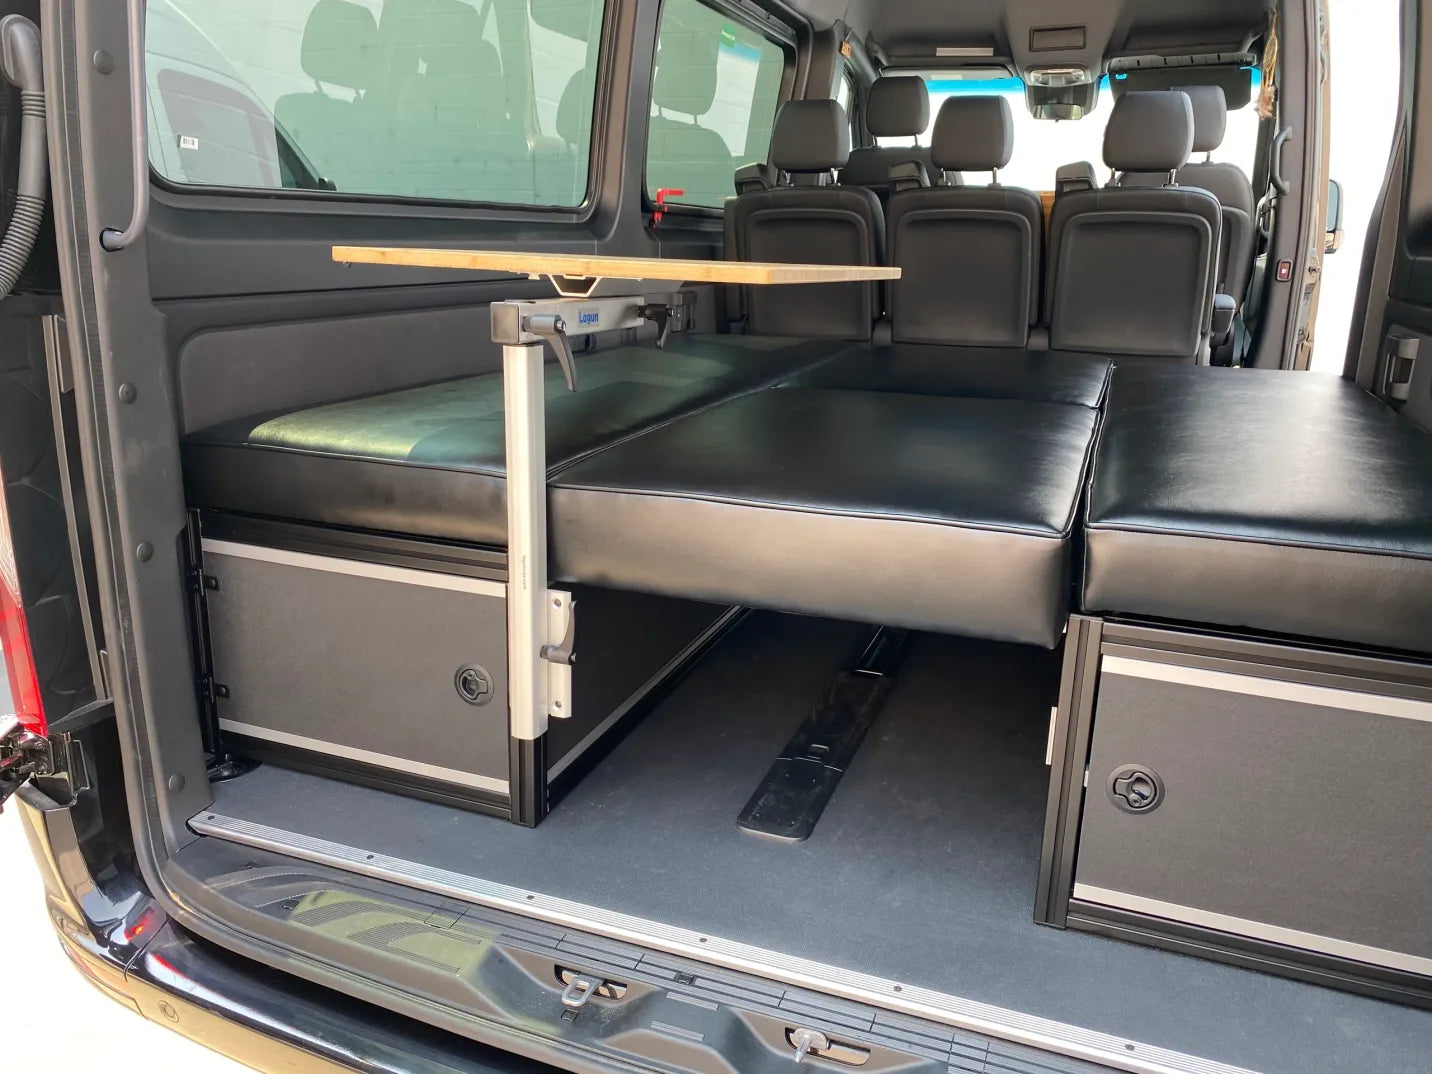 Day Bed for the SPRINTER GLSS